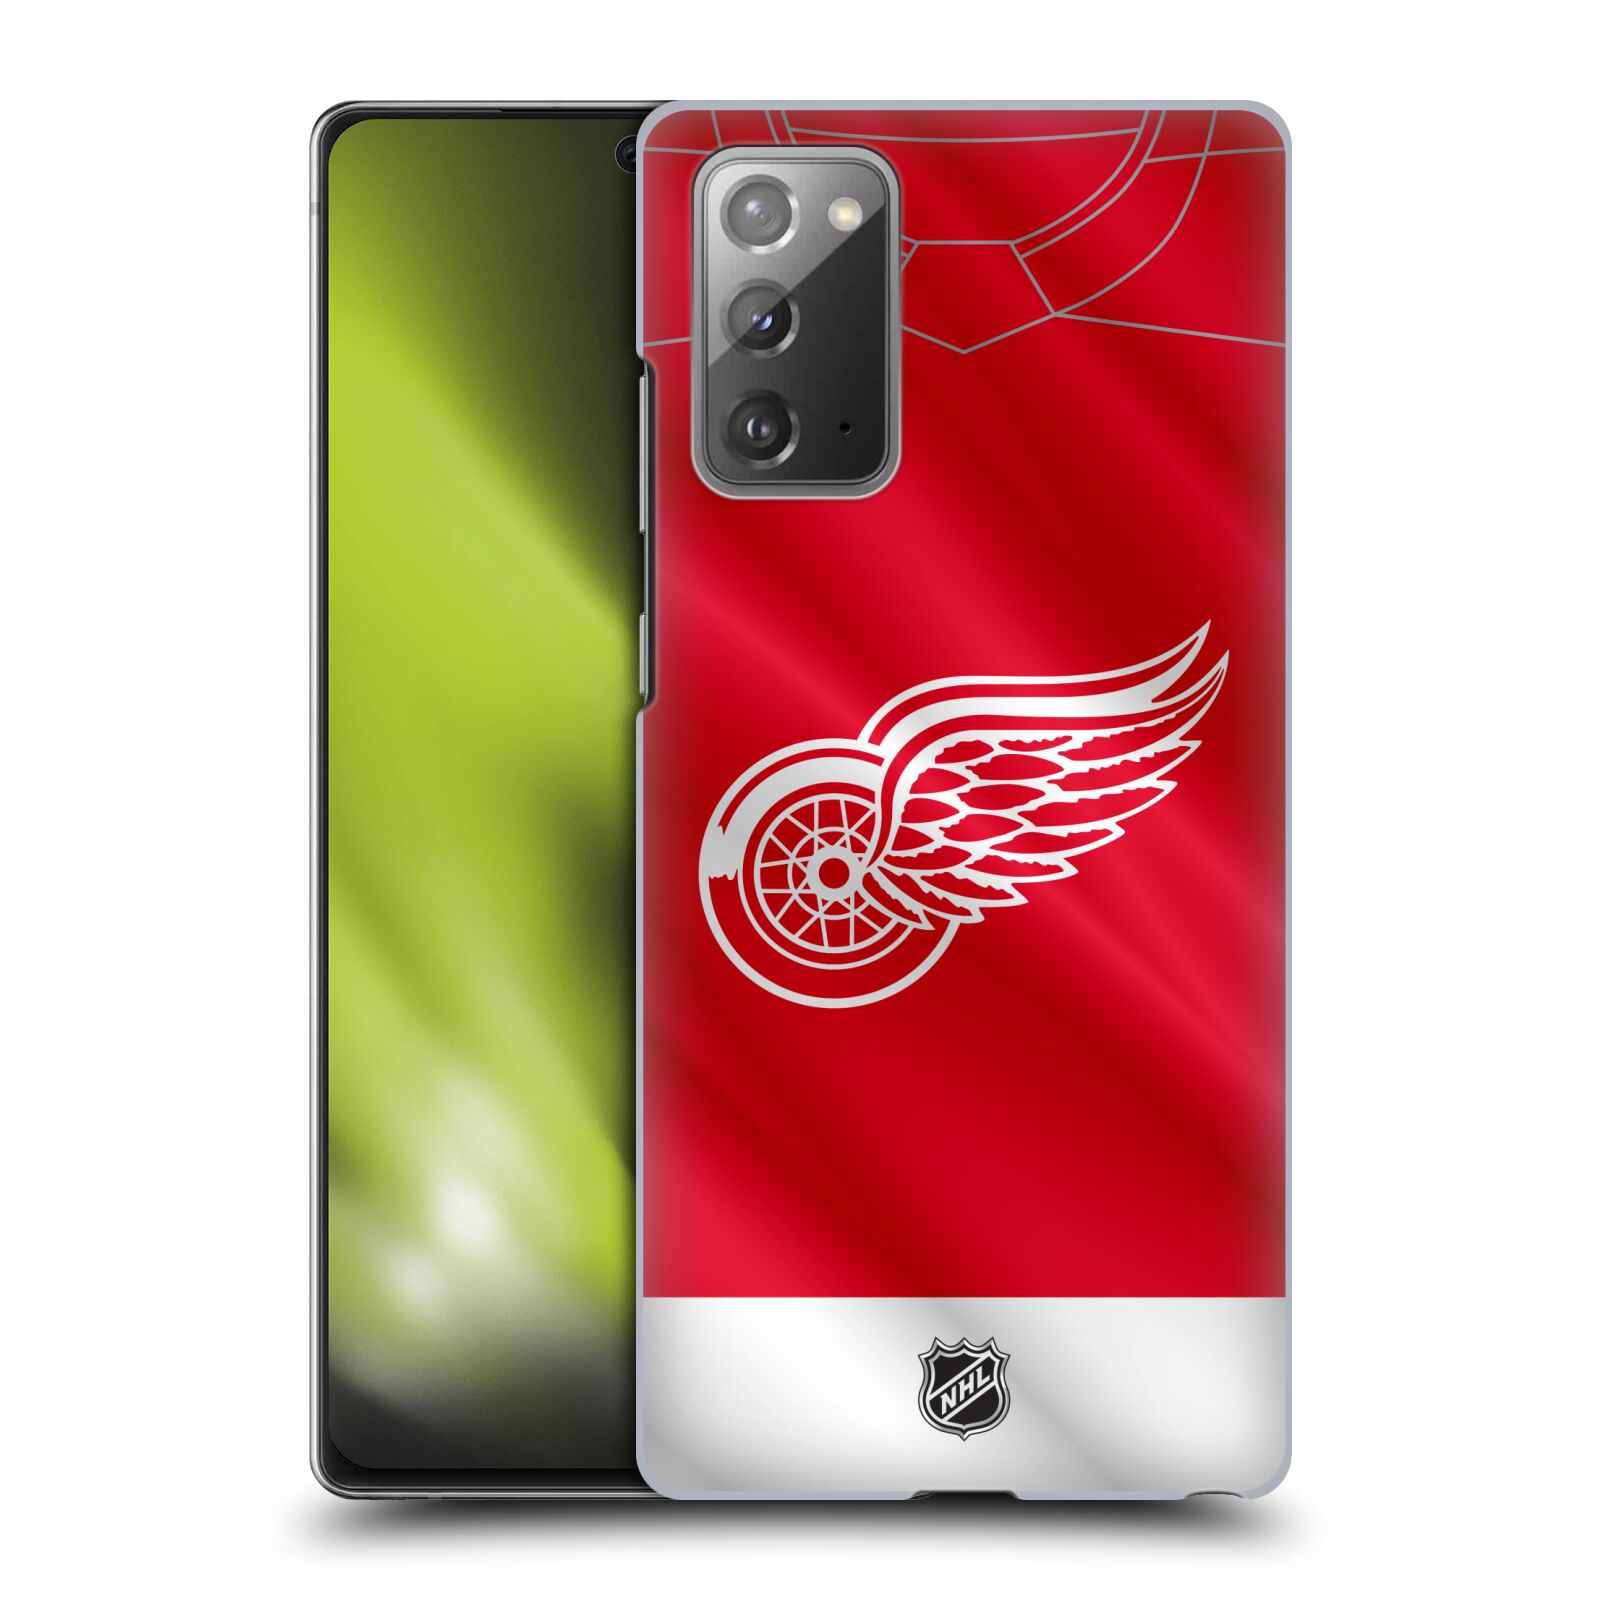 Pouzdro na mobil Samsung Galaxy Note 20 - HEAD CASE - Hokej NHL - Detroit Red Wings - Dres